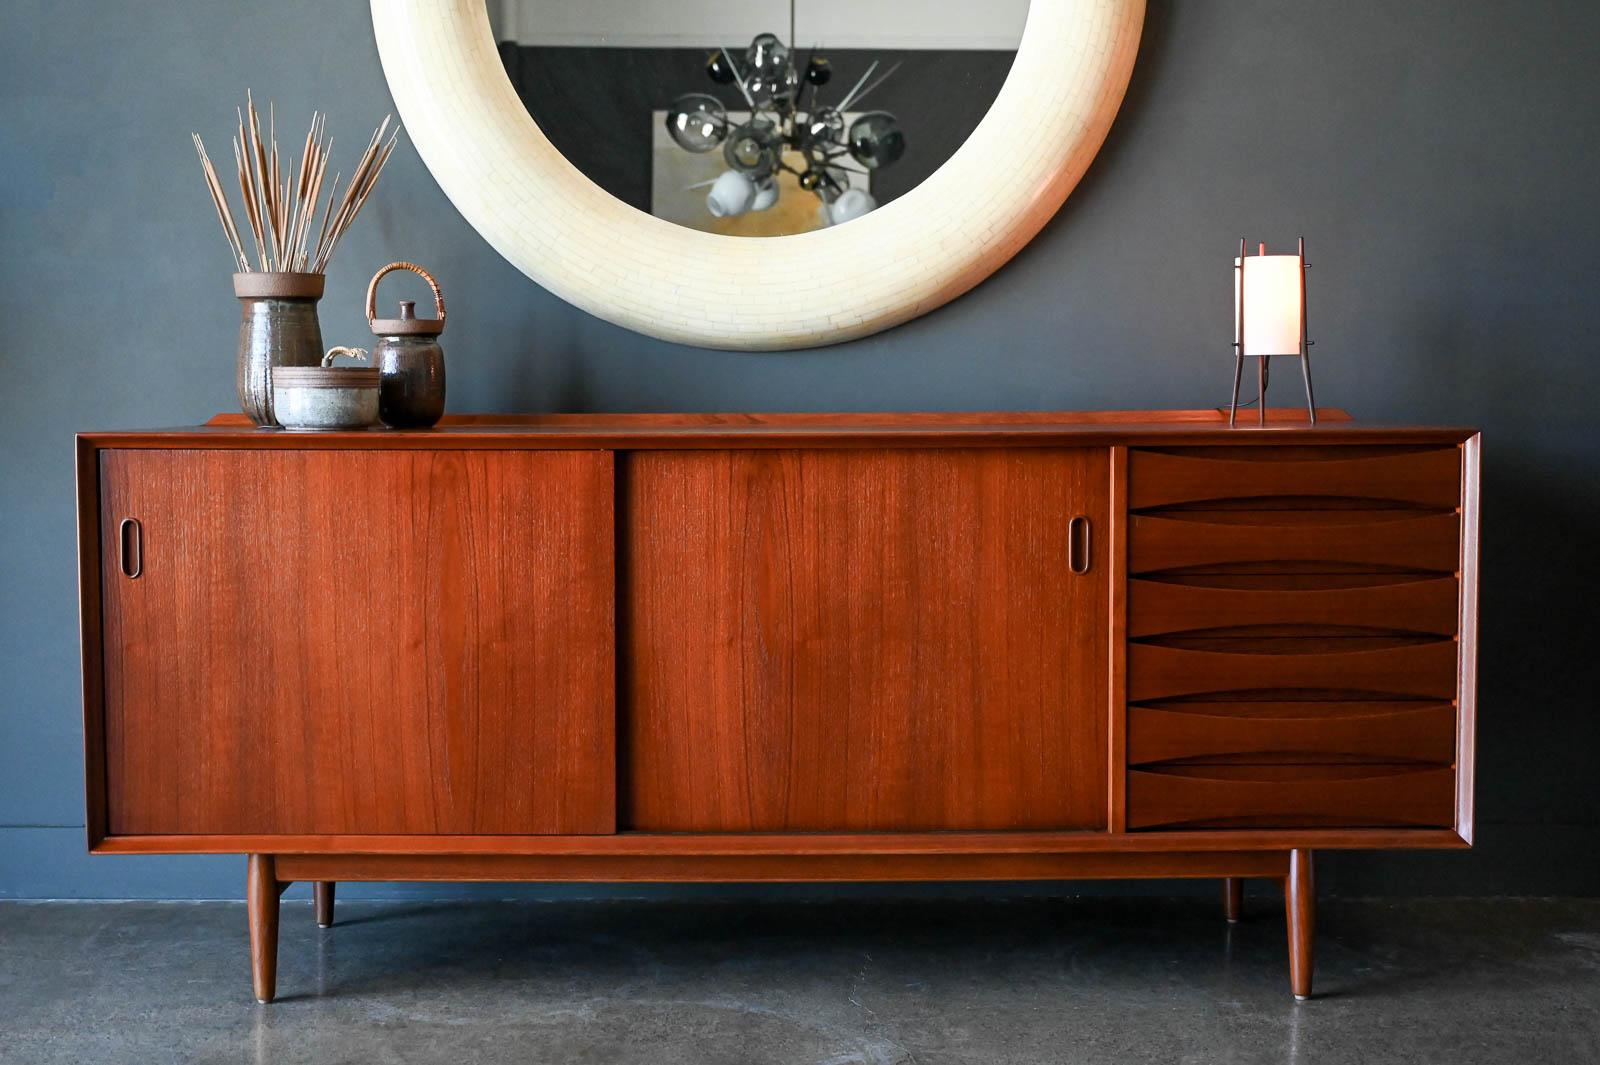 Teak Credenza Model 29 by Arne Vodder for Sibast Furniture, circa 1960. Professionally restored in showroom condition, this beautiful model PD 29 credenza for Povl Dinesen for Sibast Furniture, was designed by Arne Vodder. Beautiful teak grain,